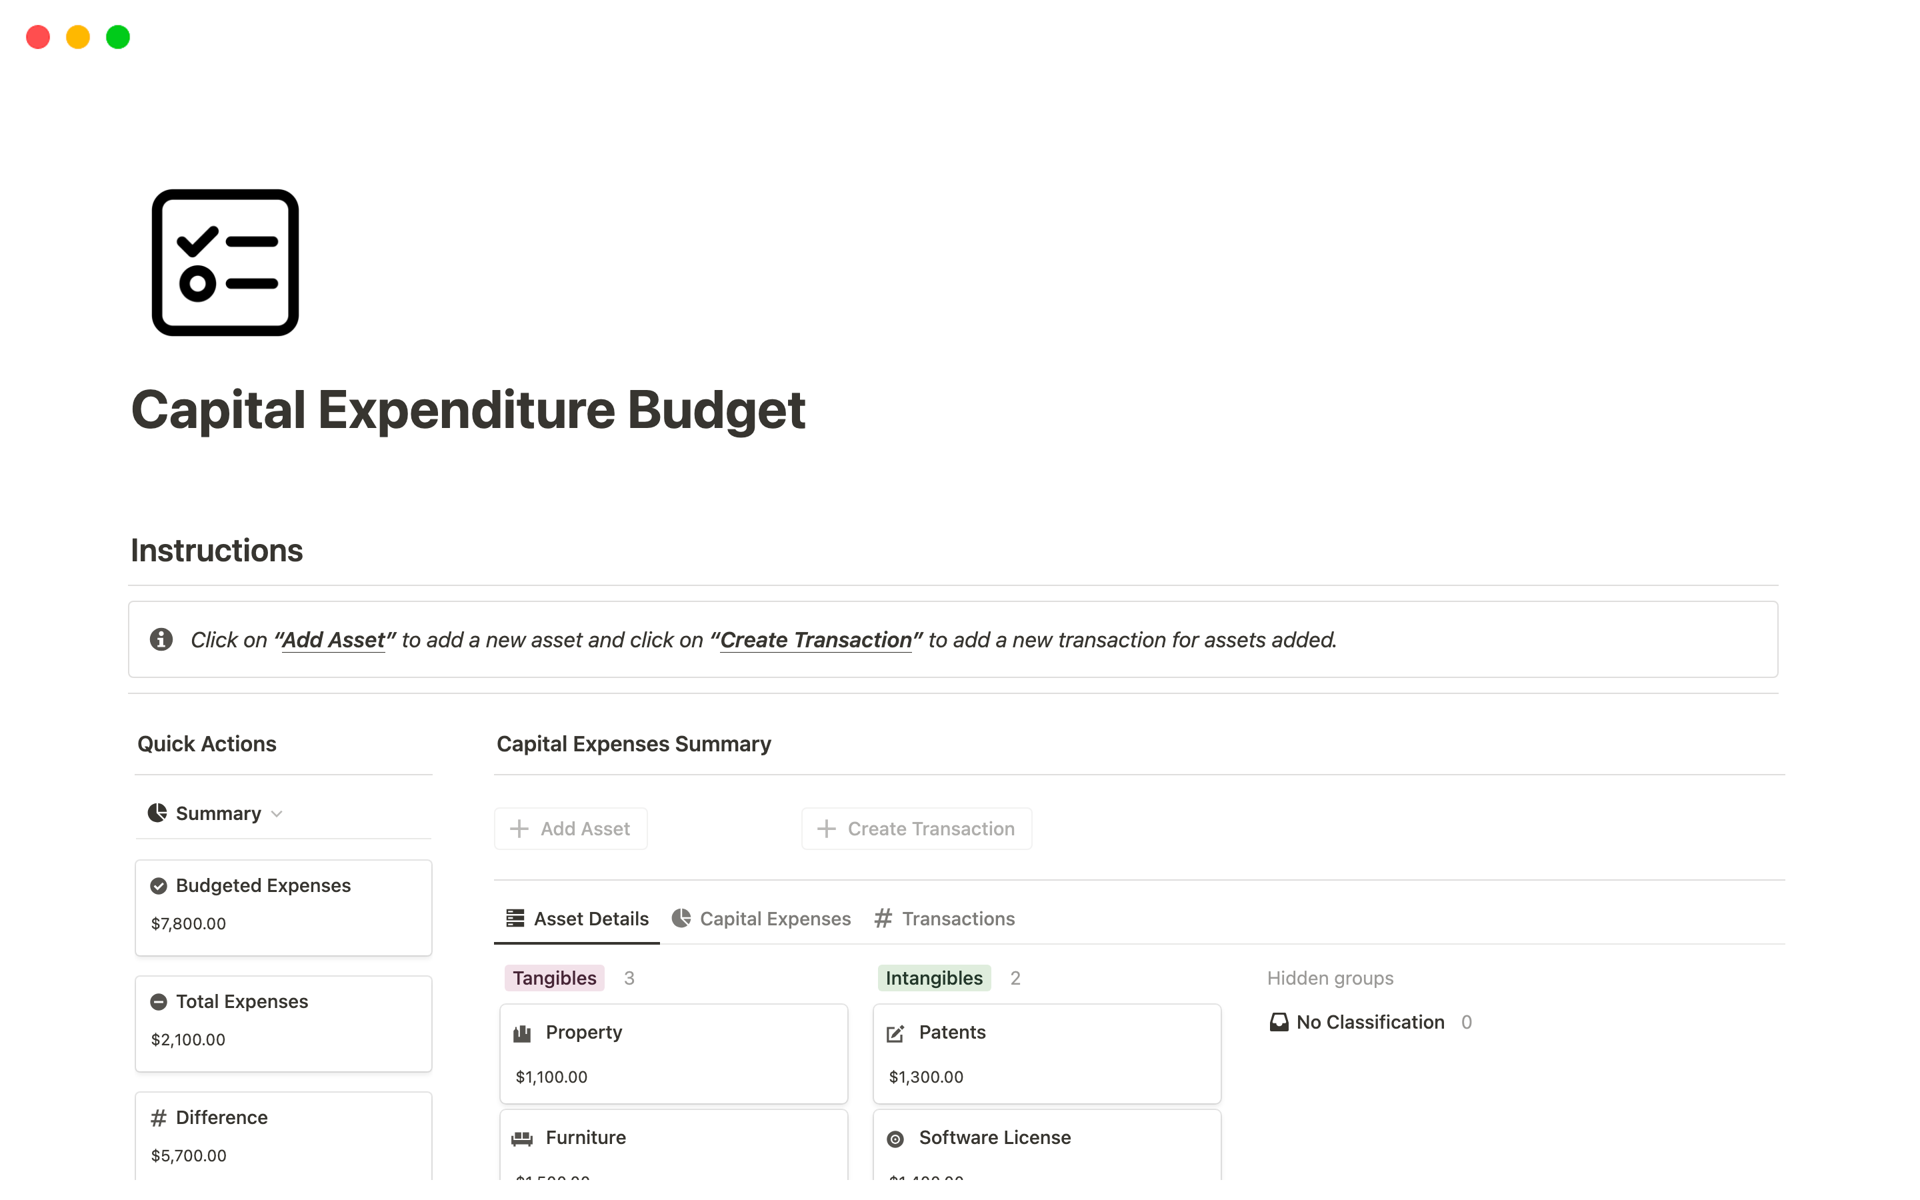 This template helps individuals or businesses outline their anticipated spending on long-term assets and investments over a specific period and stay within budgeted expenses.